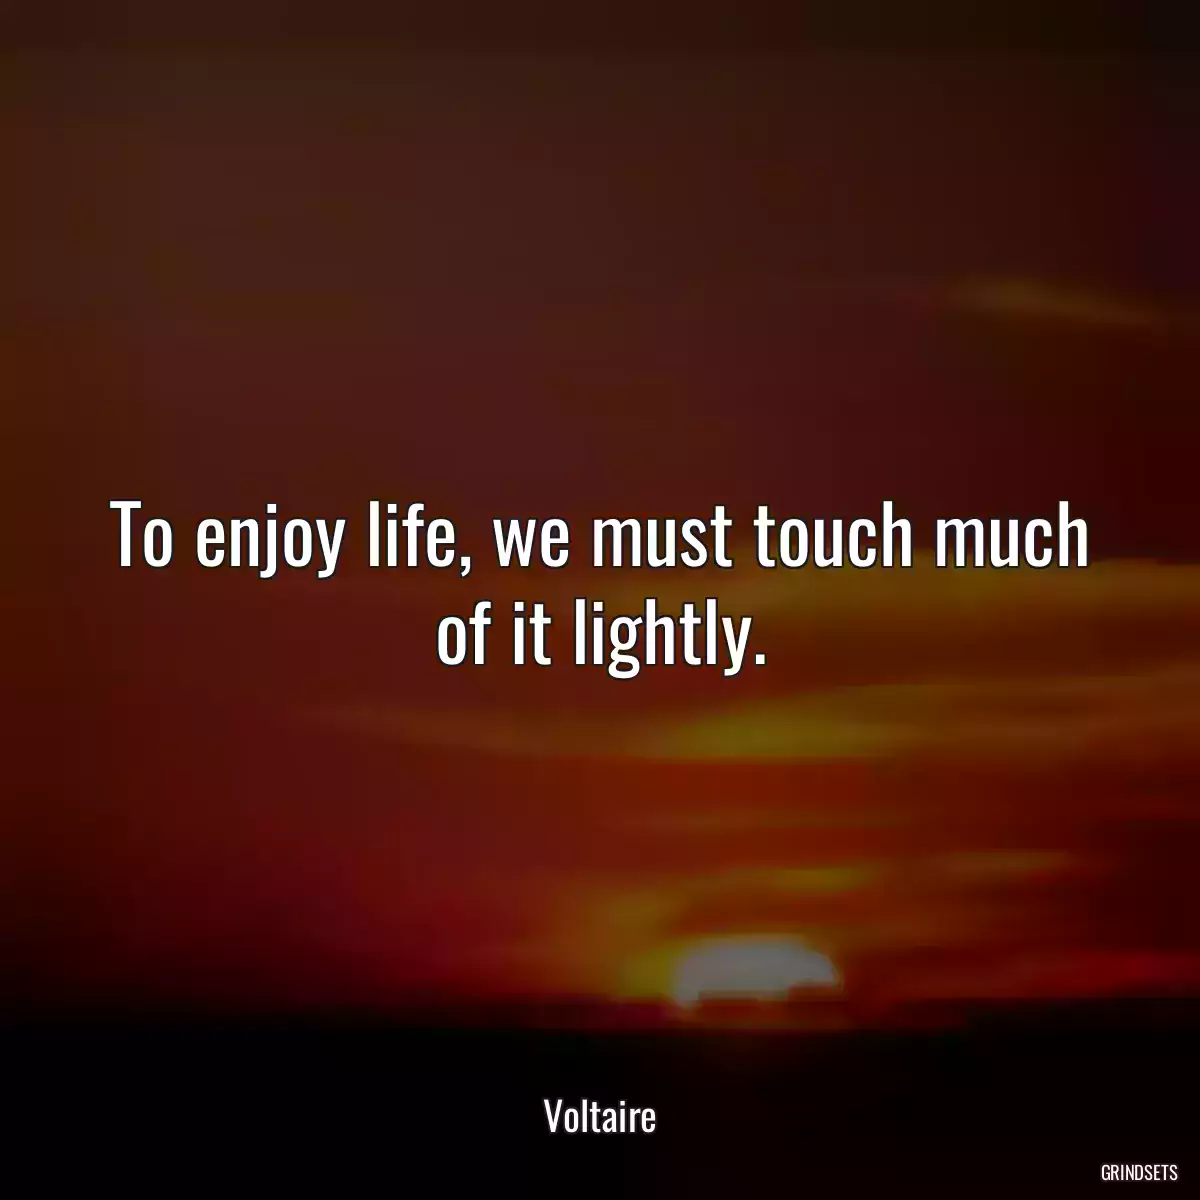 To enjoy life, we must touch much of it lightly.